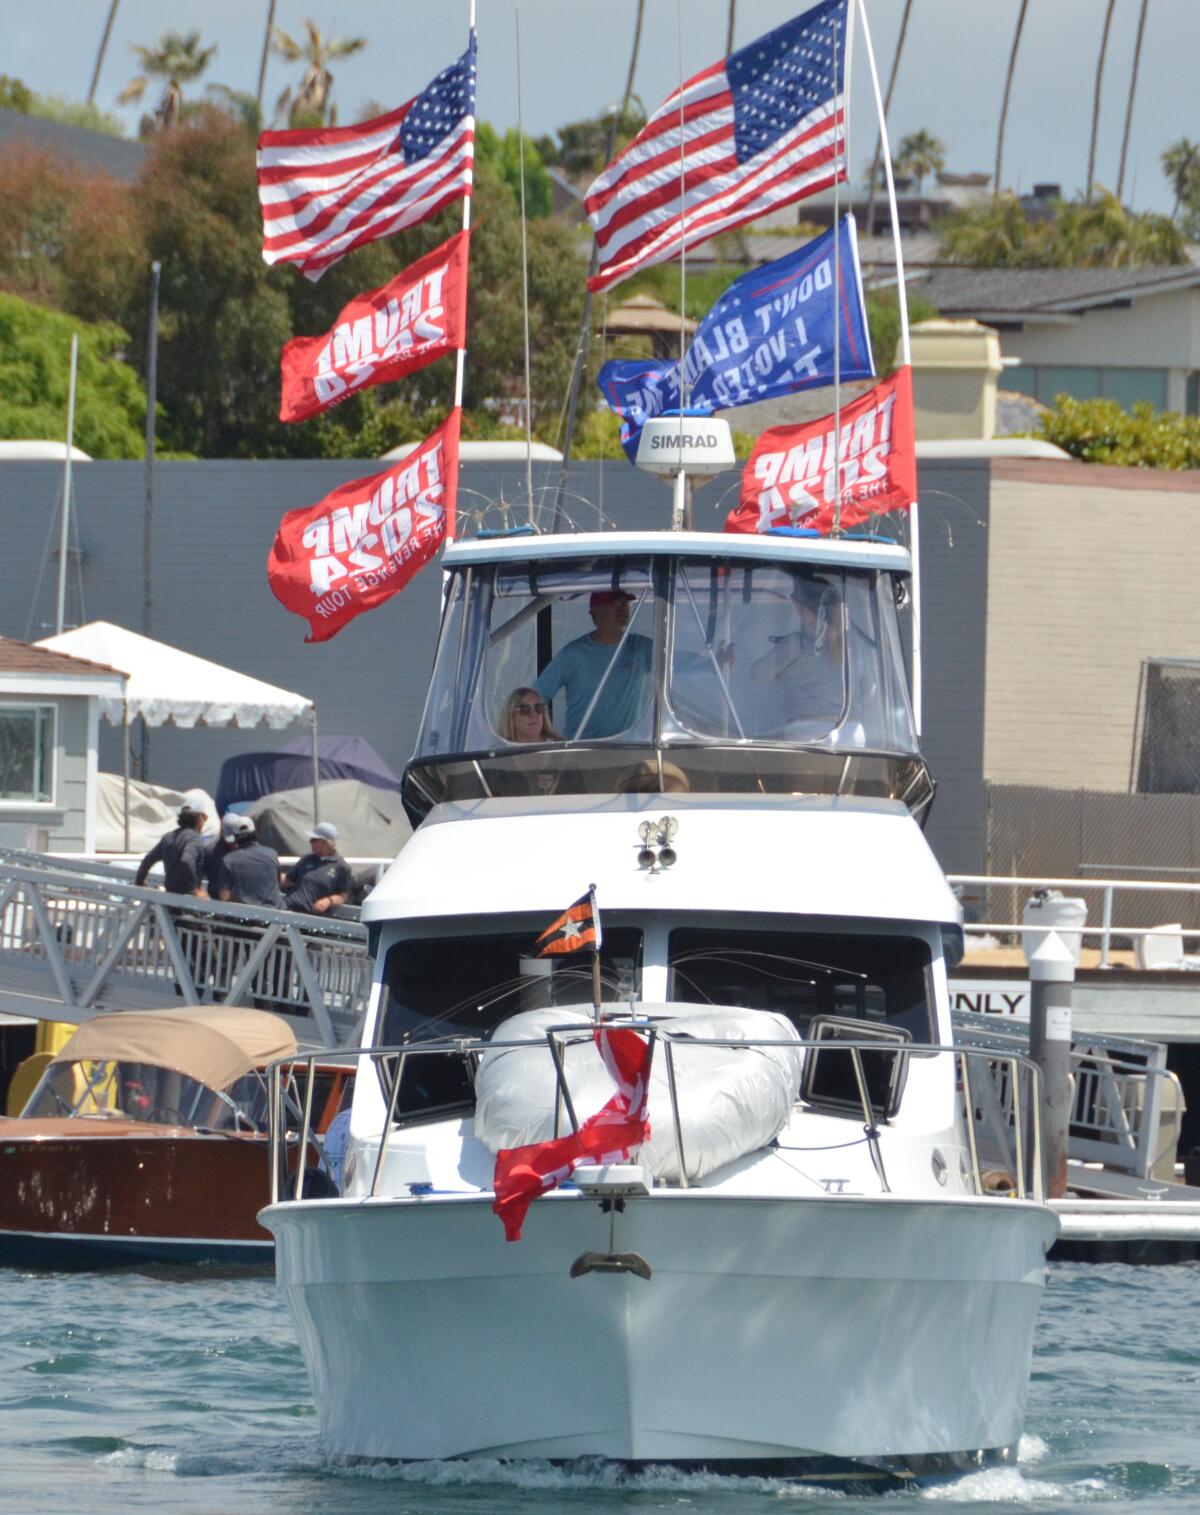 Flags flapped in the breeze atop the flybridge as a boat cruised in the Trumptilla parade in Newport Harbor.